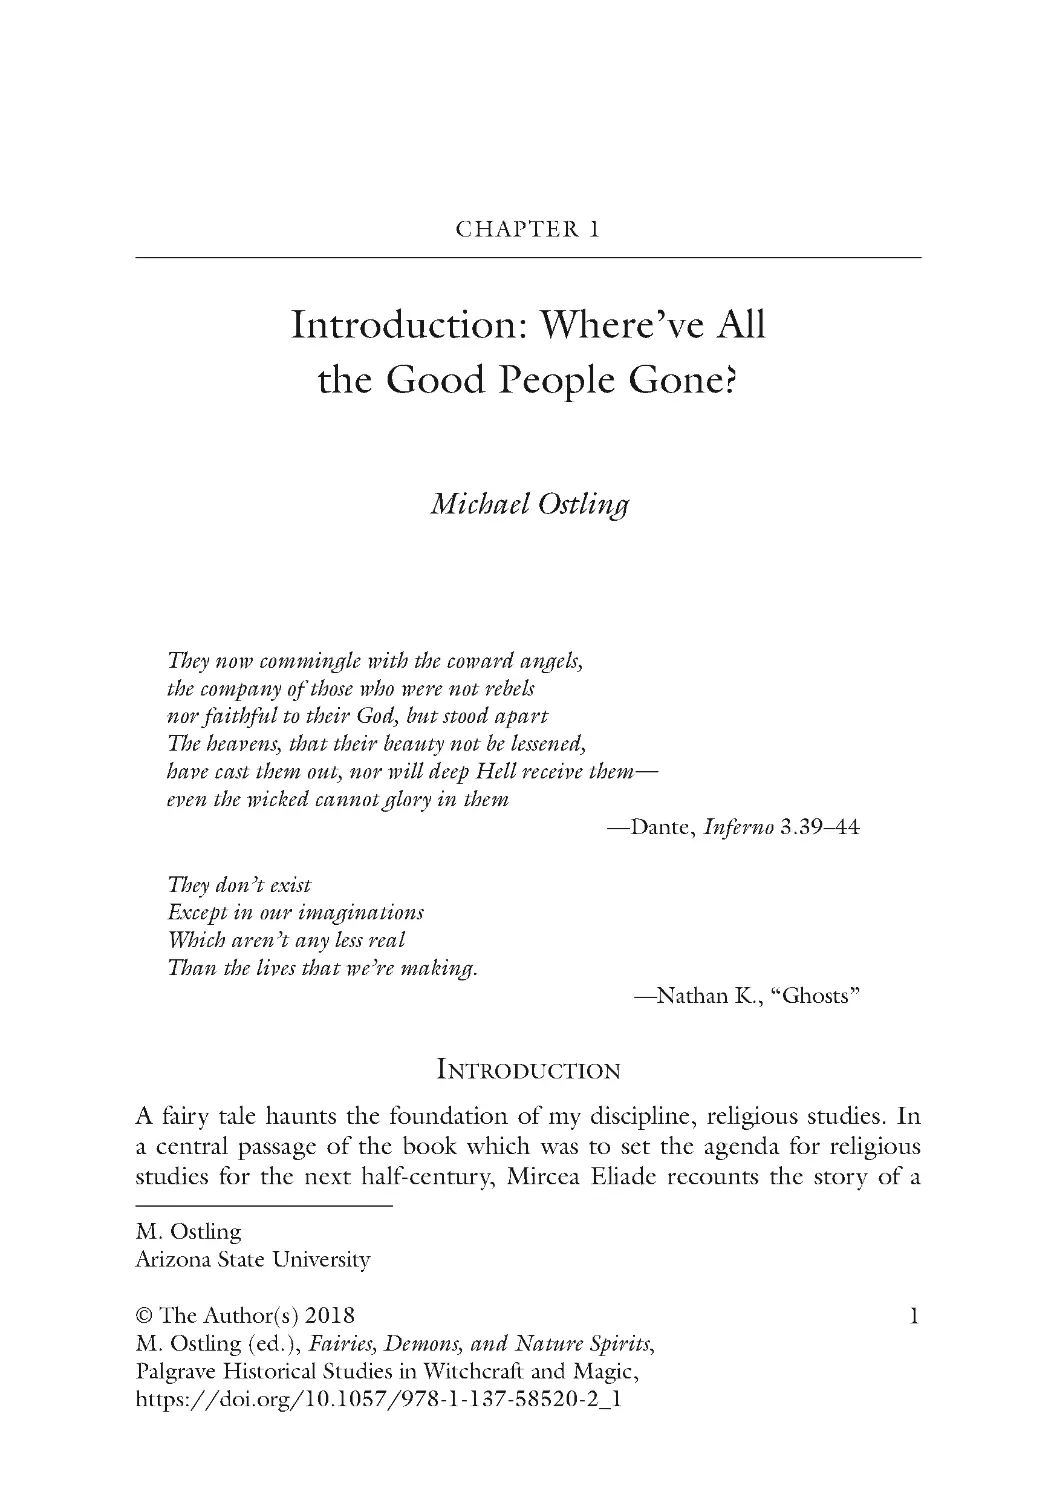 Chapter 1 Introduction: Where’ve All the Good People Gone?